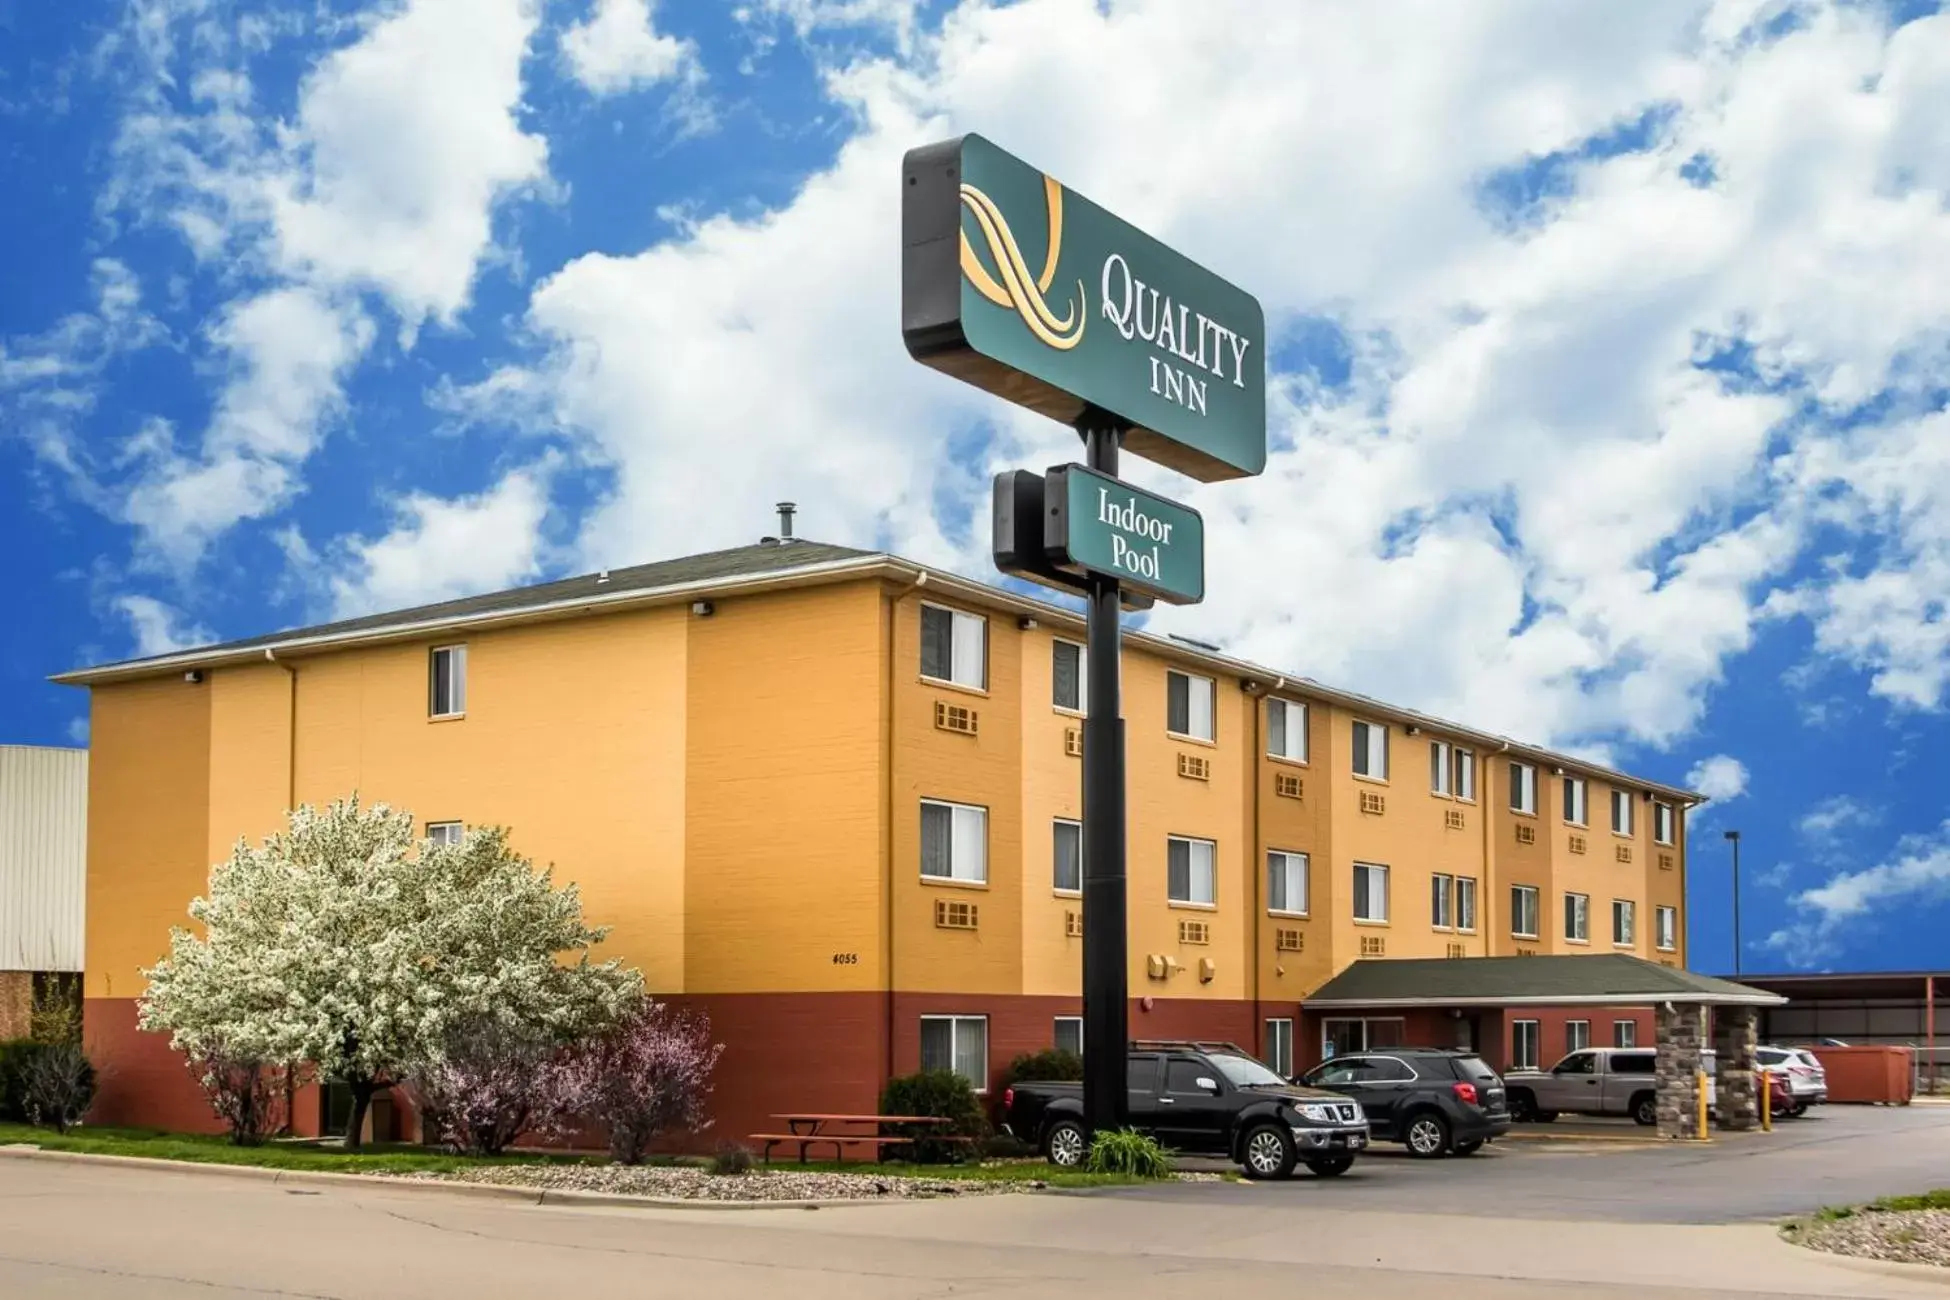 Property Building in Quality Inn Dubuque on Hwy 20